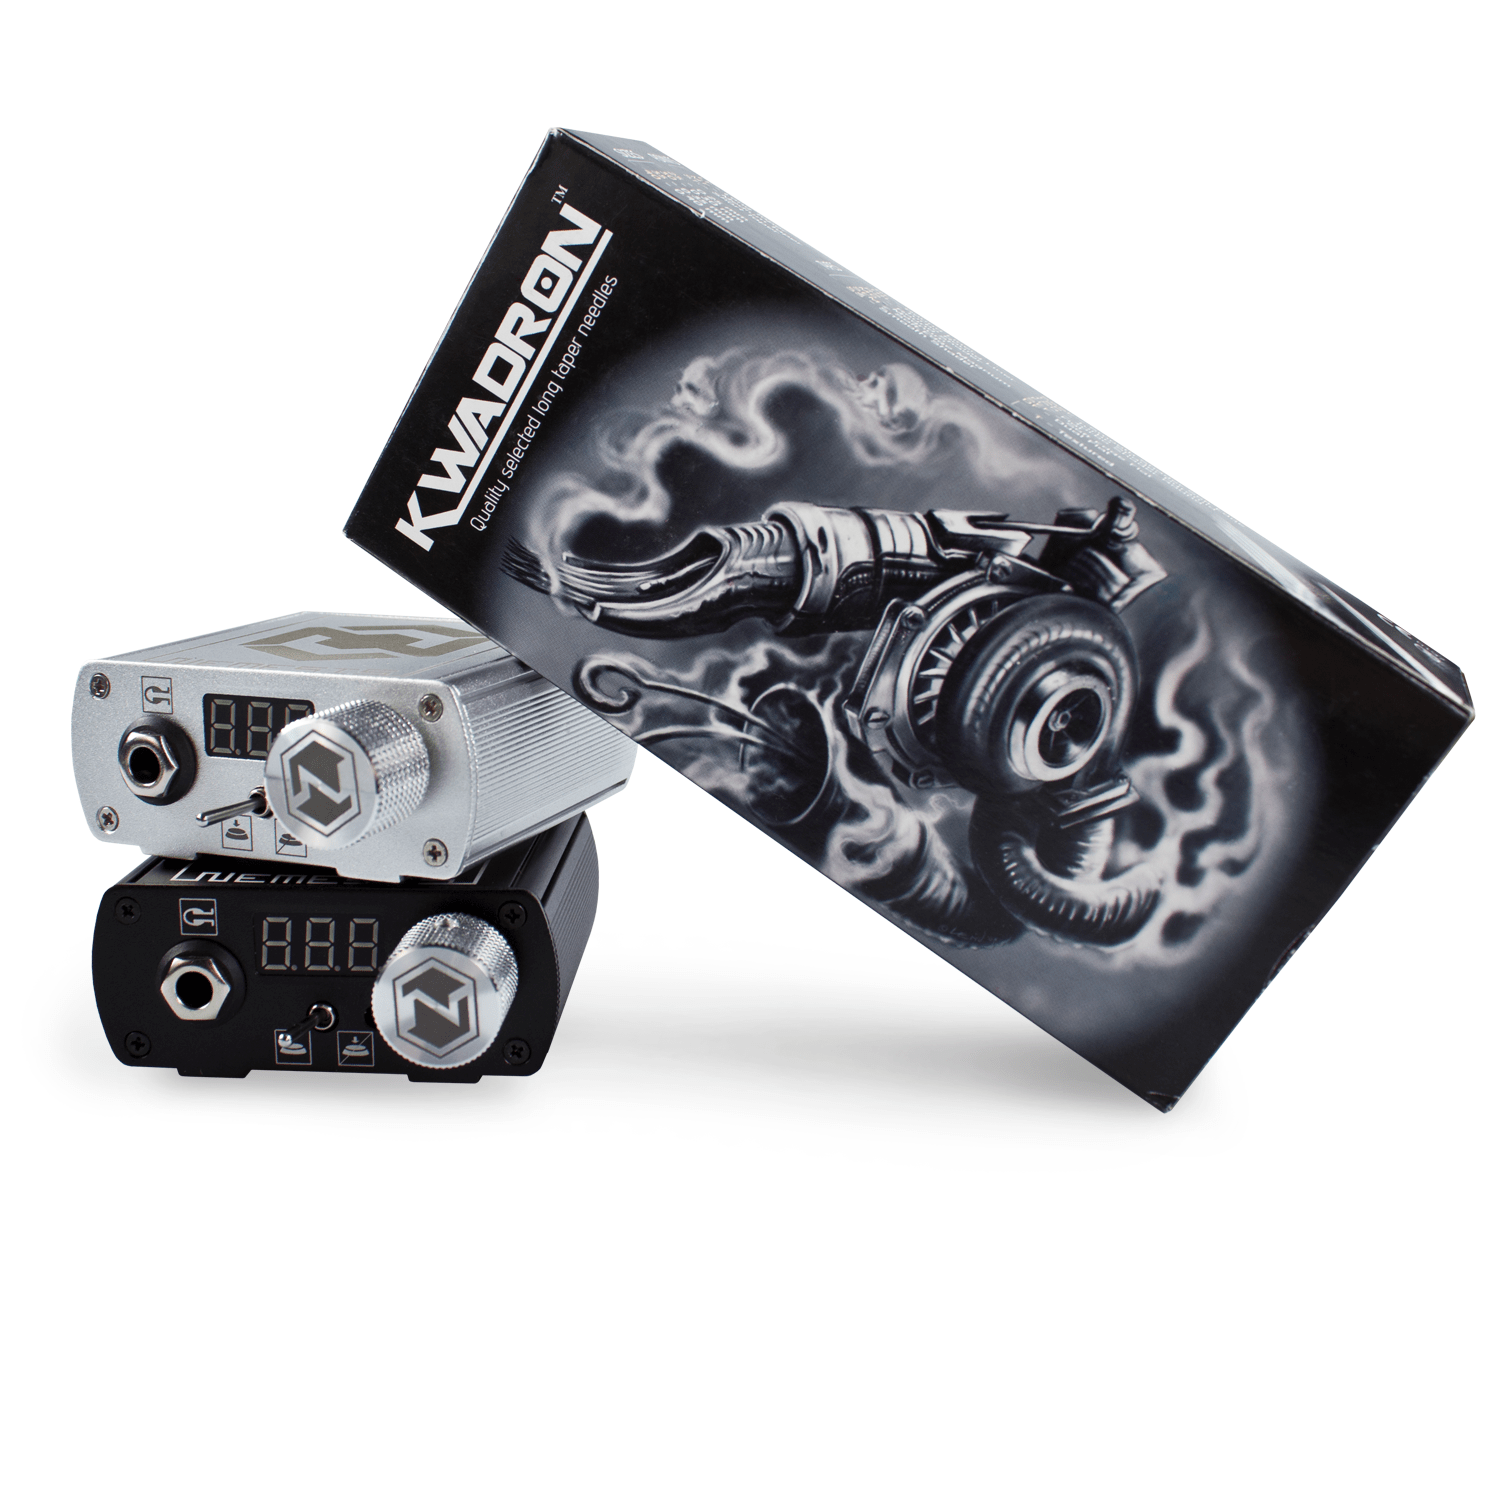 Nemesis Professional Tattoo Power Supply in Silver by Kwadron Black and Silver 2